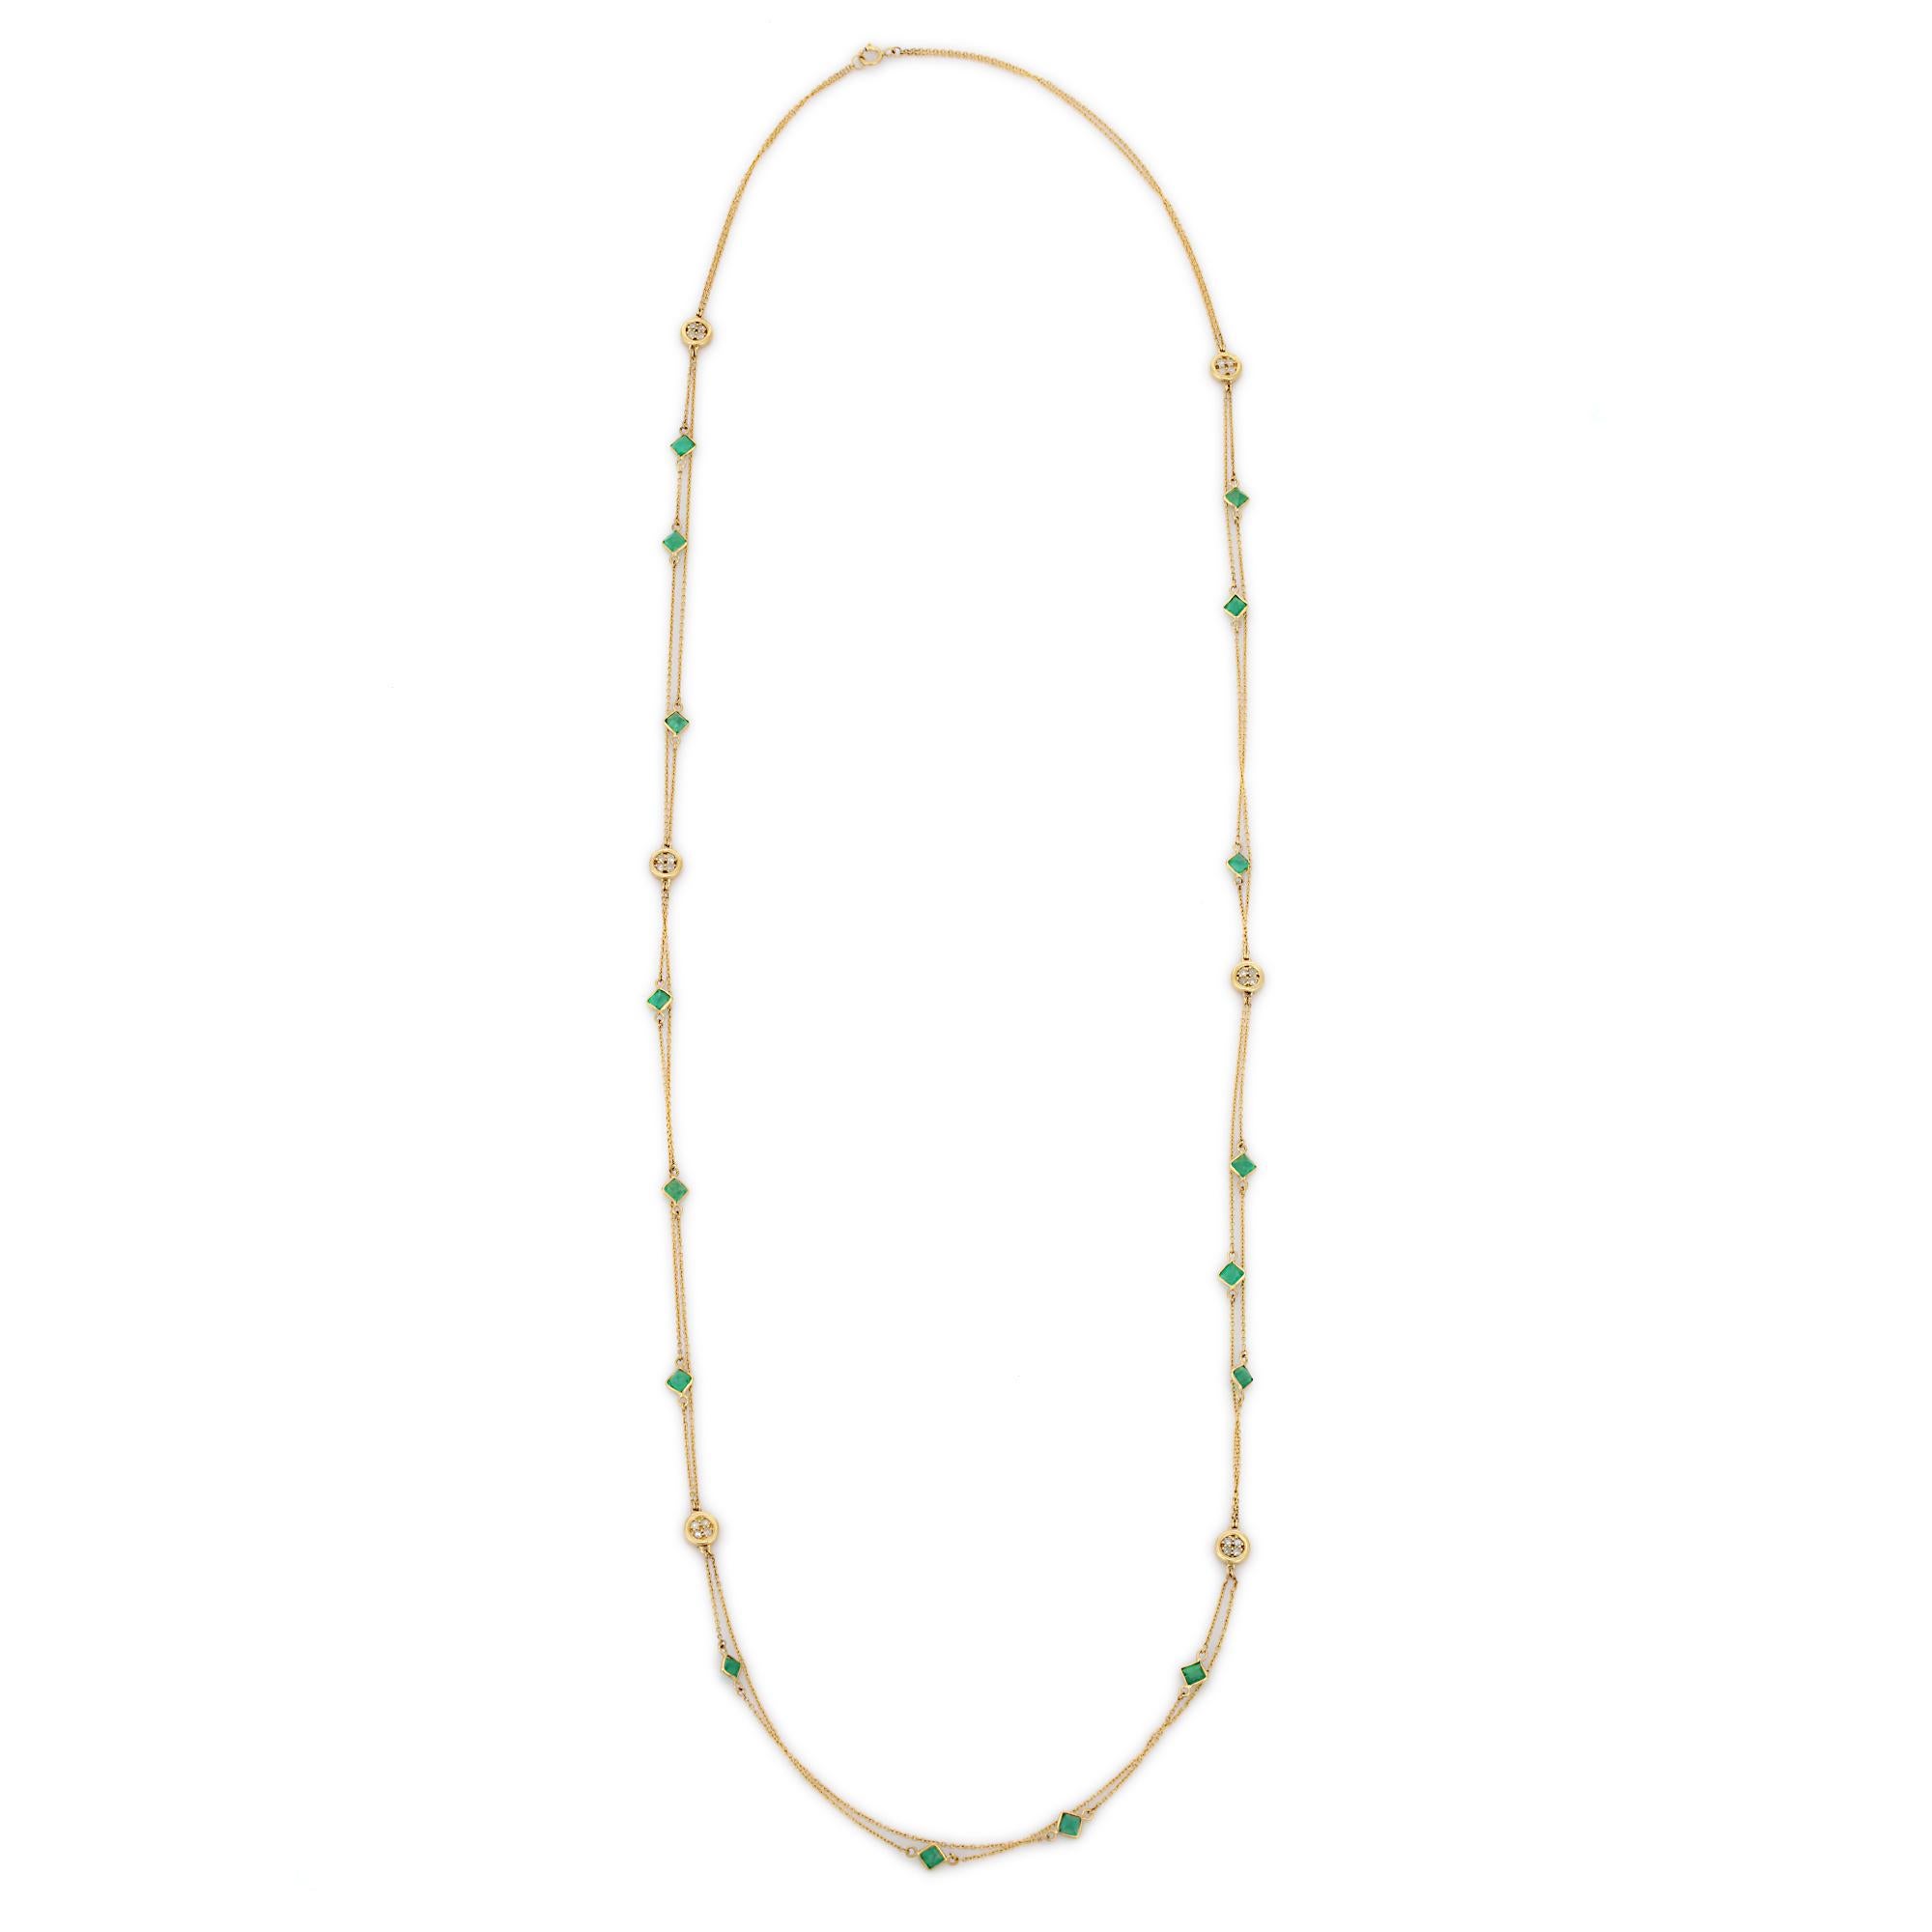 Square Cut 3.75 Carat Emerald Diamond Multi Strained Chain Necklace in 18K Yellow Gold For Sale